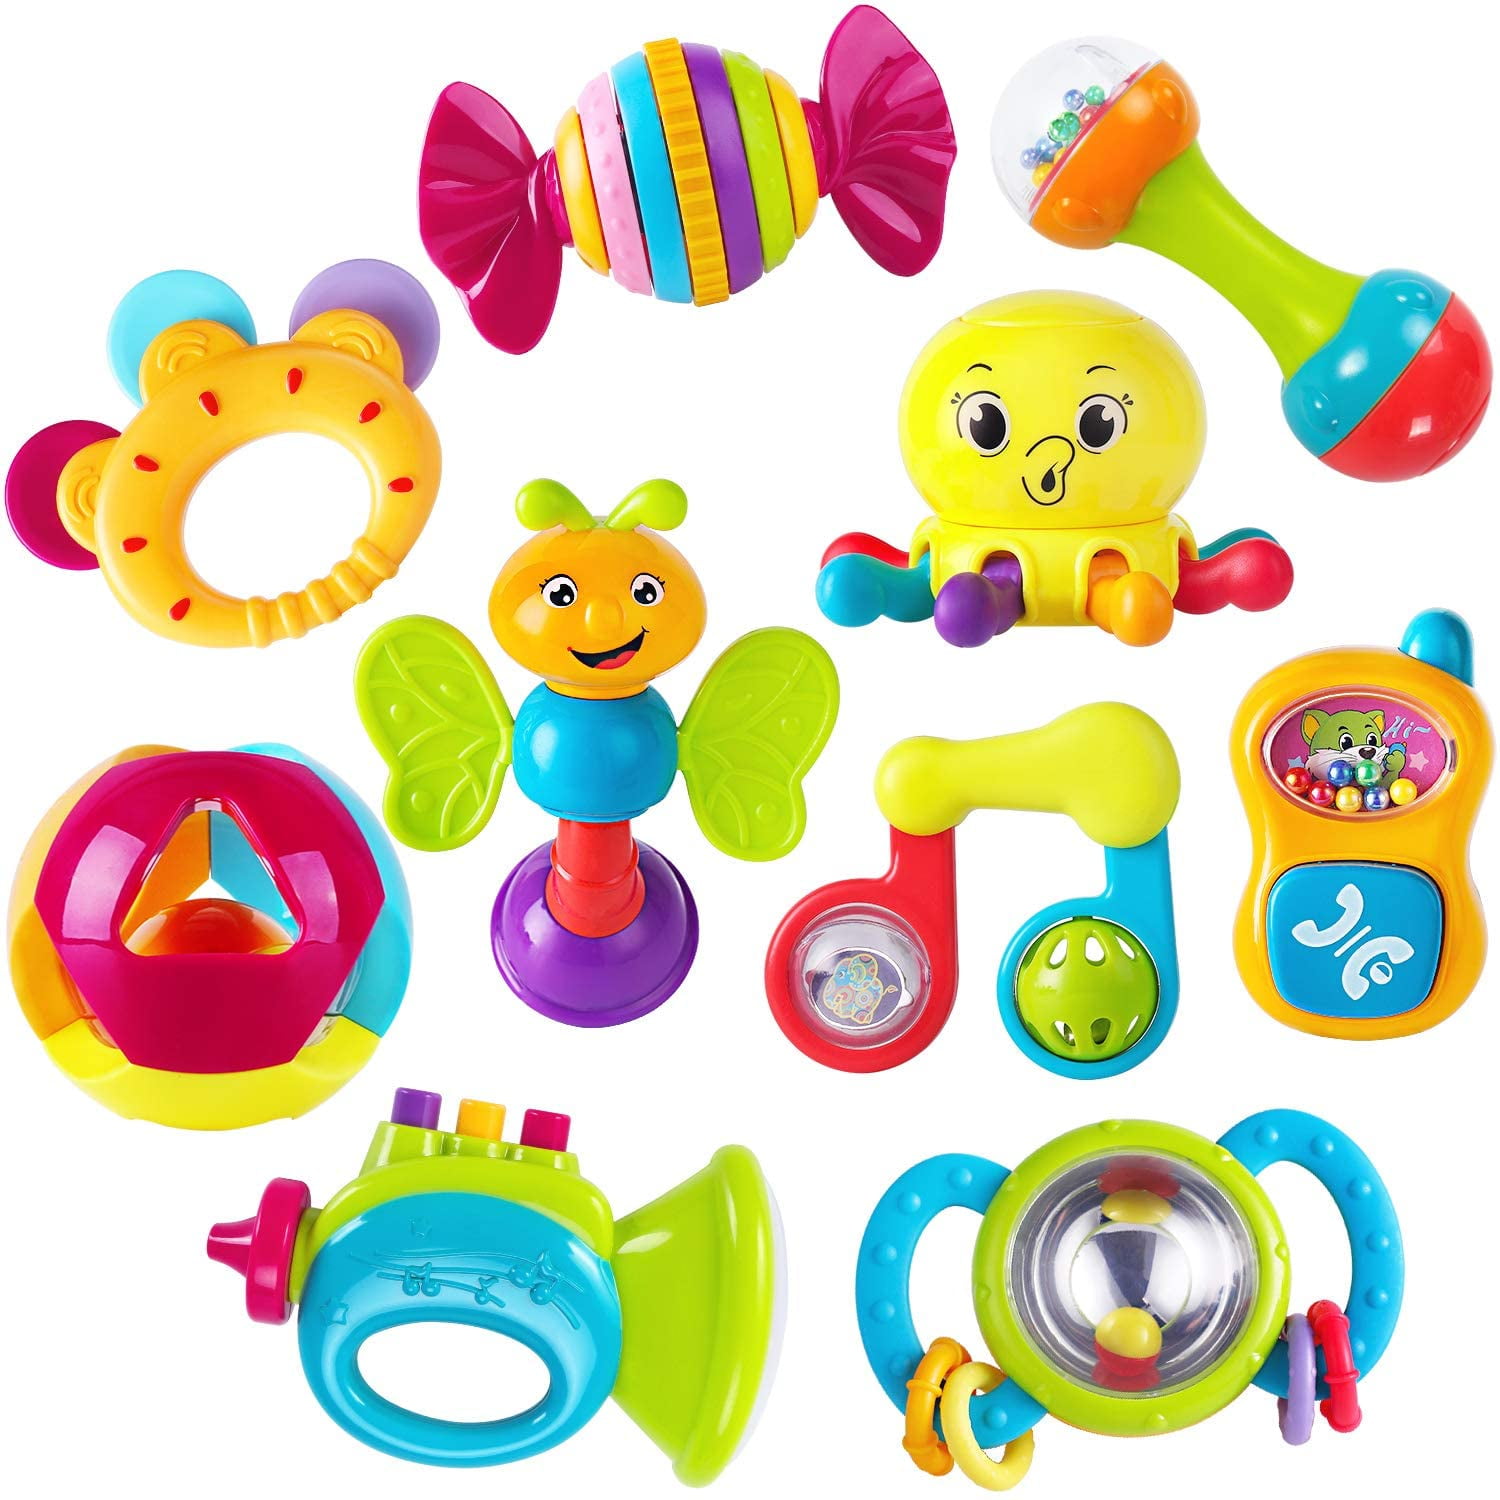 Silicon Chew Teether Newborn Shower Gifts for 0 3 6 9 12 Month 1 Year Old Boy Girl iPlay Shaker Grab Spin Rattles Infant Teething Toys iLearn 10 Pcs Animal Baby Rattle Set Toddler Birthday Toy 